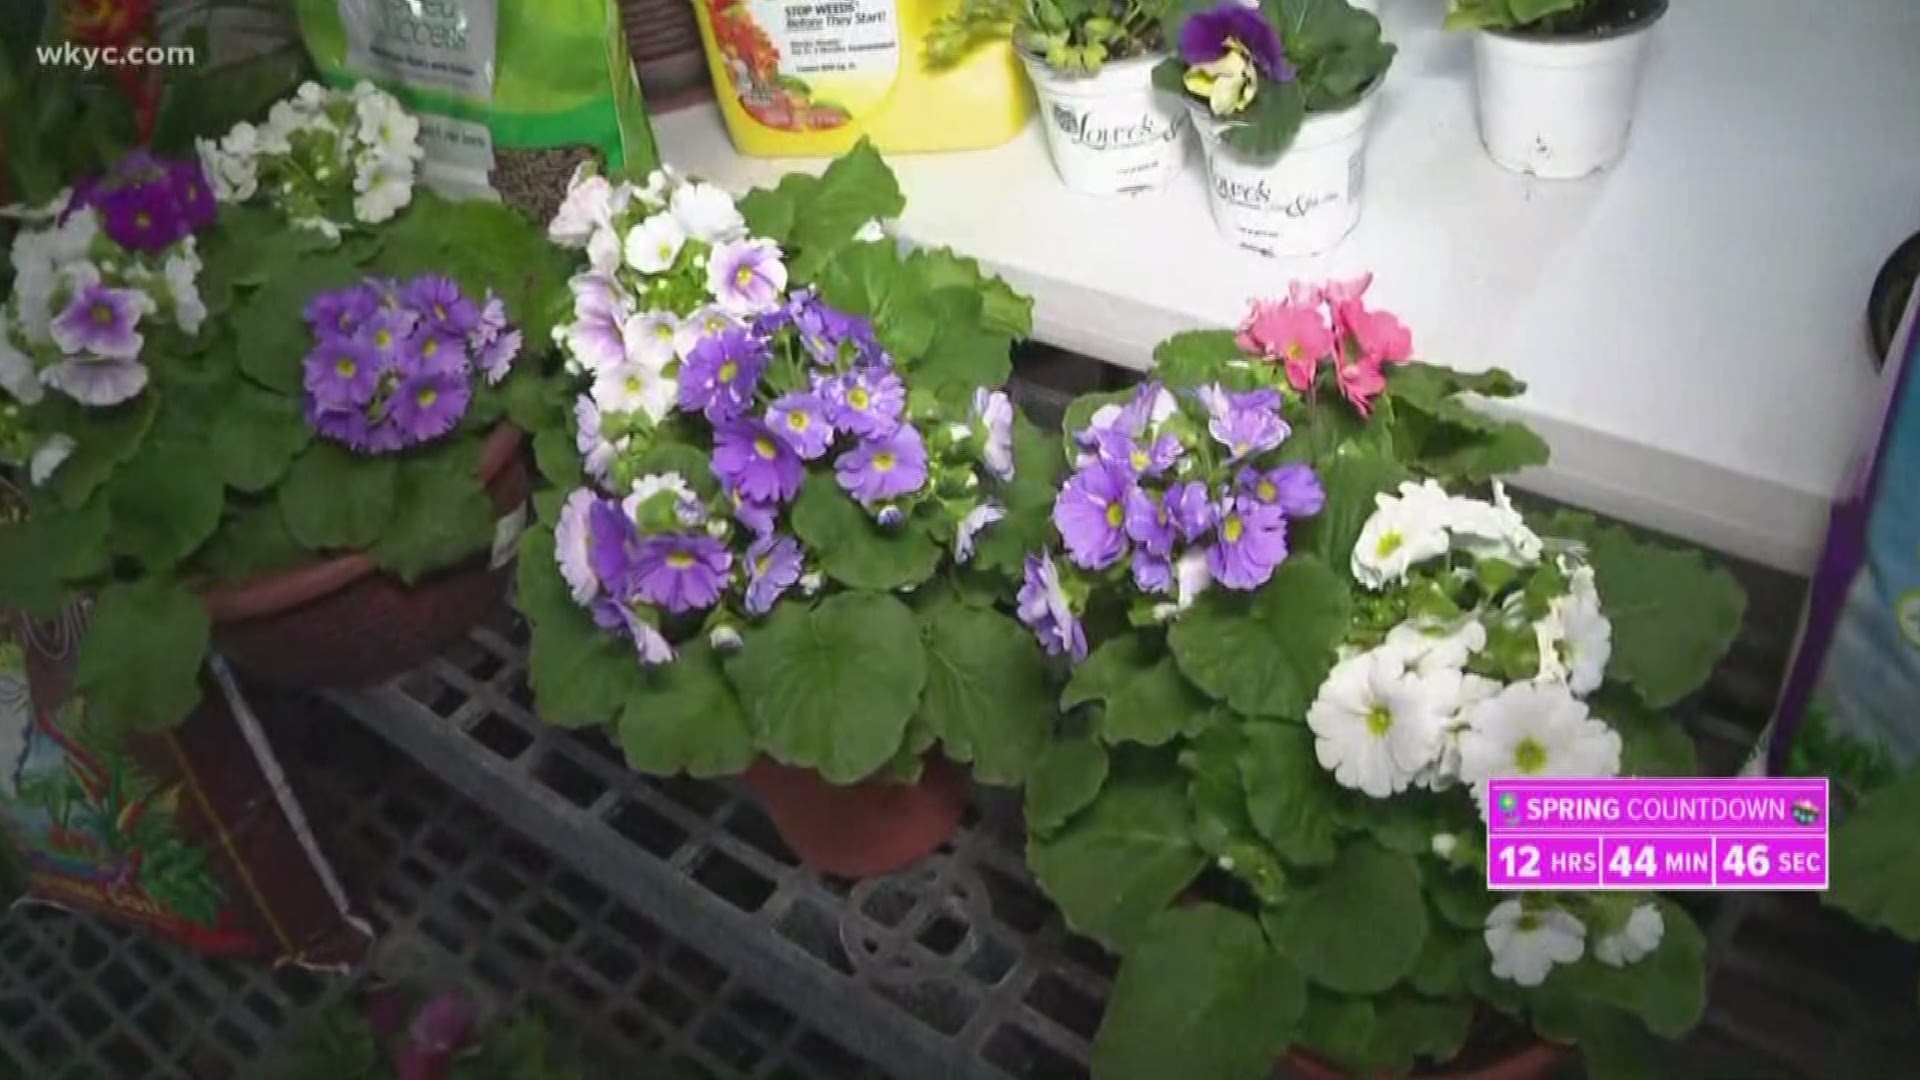 March 20, 2019: Spring arrives today, so we're looking ahead to the warmer weather with some gardening tips from Lowe's Greenhouse in Chagrin Falls.